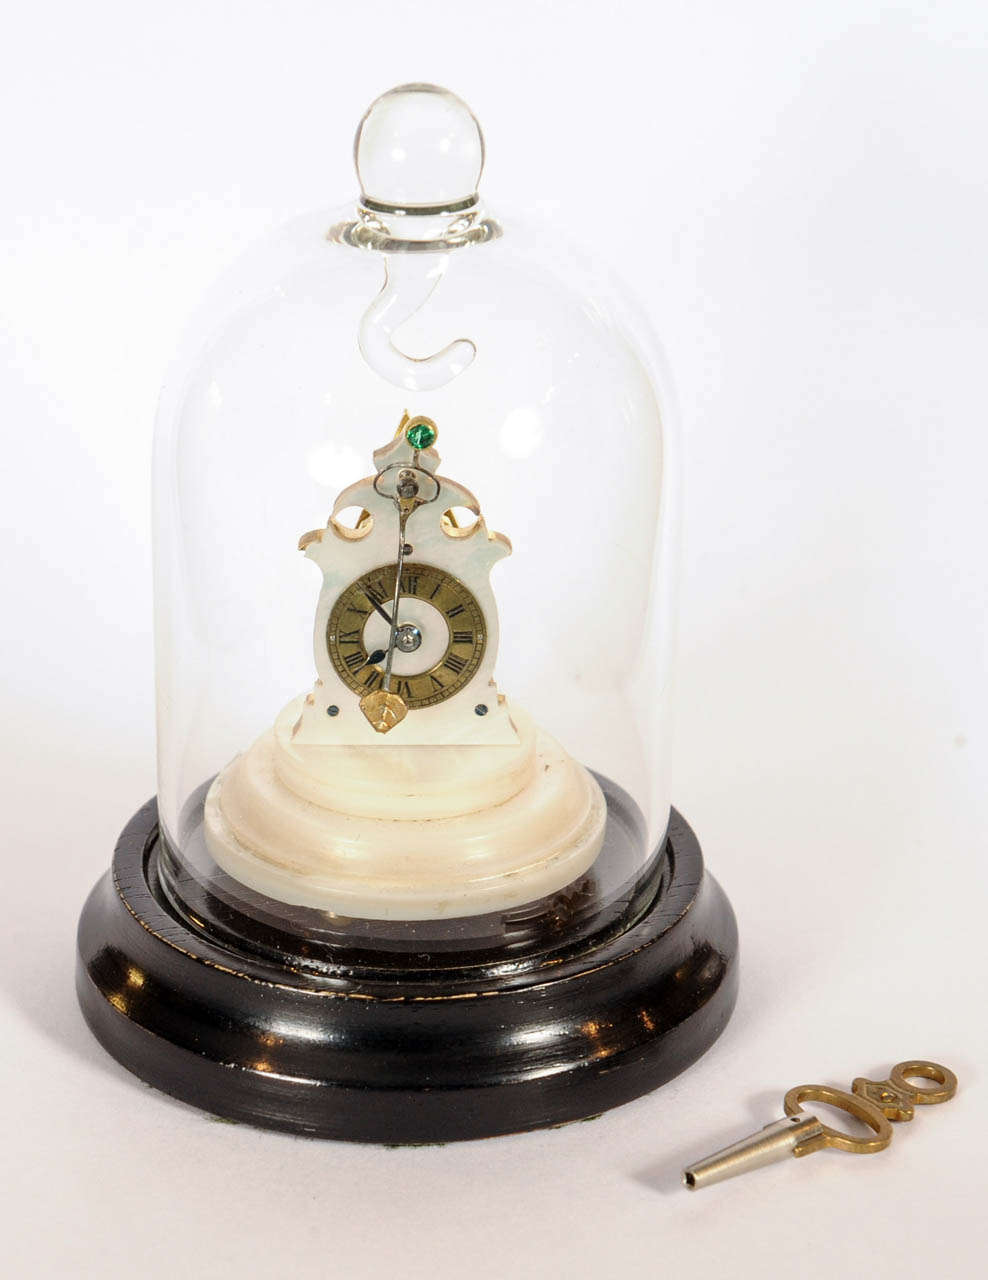 extremely small clock with dome and base.